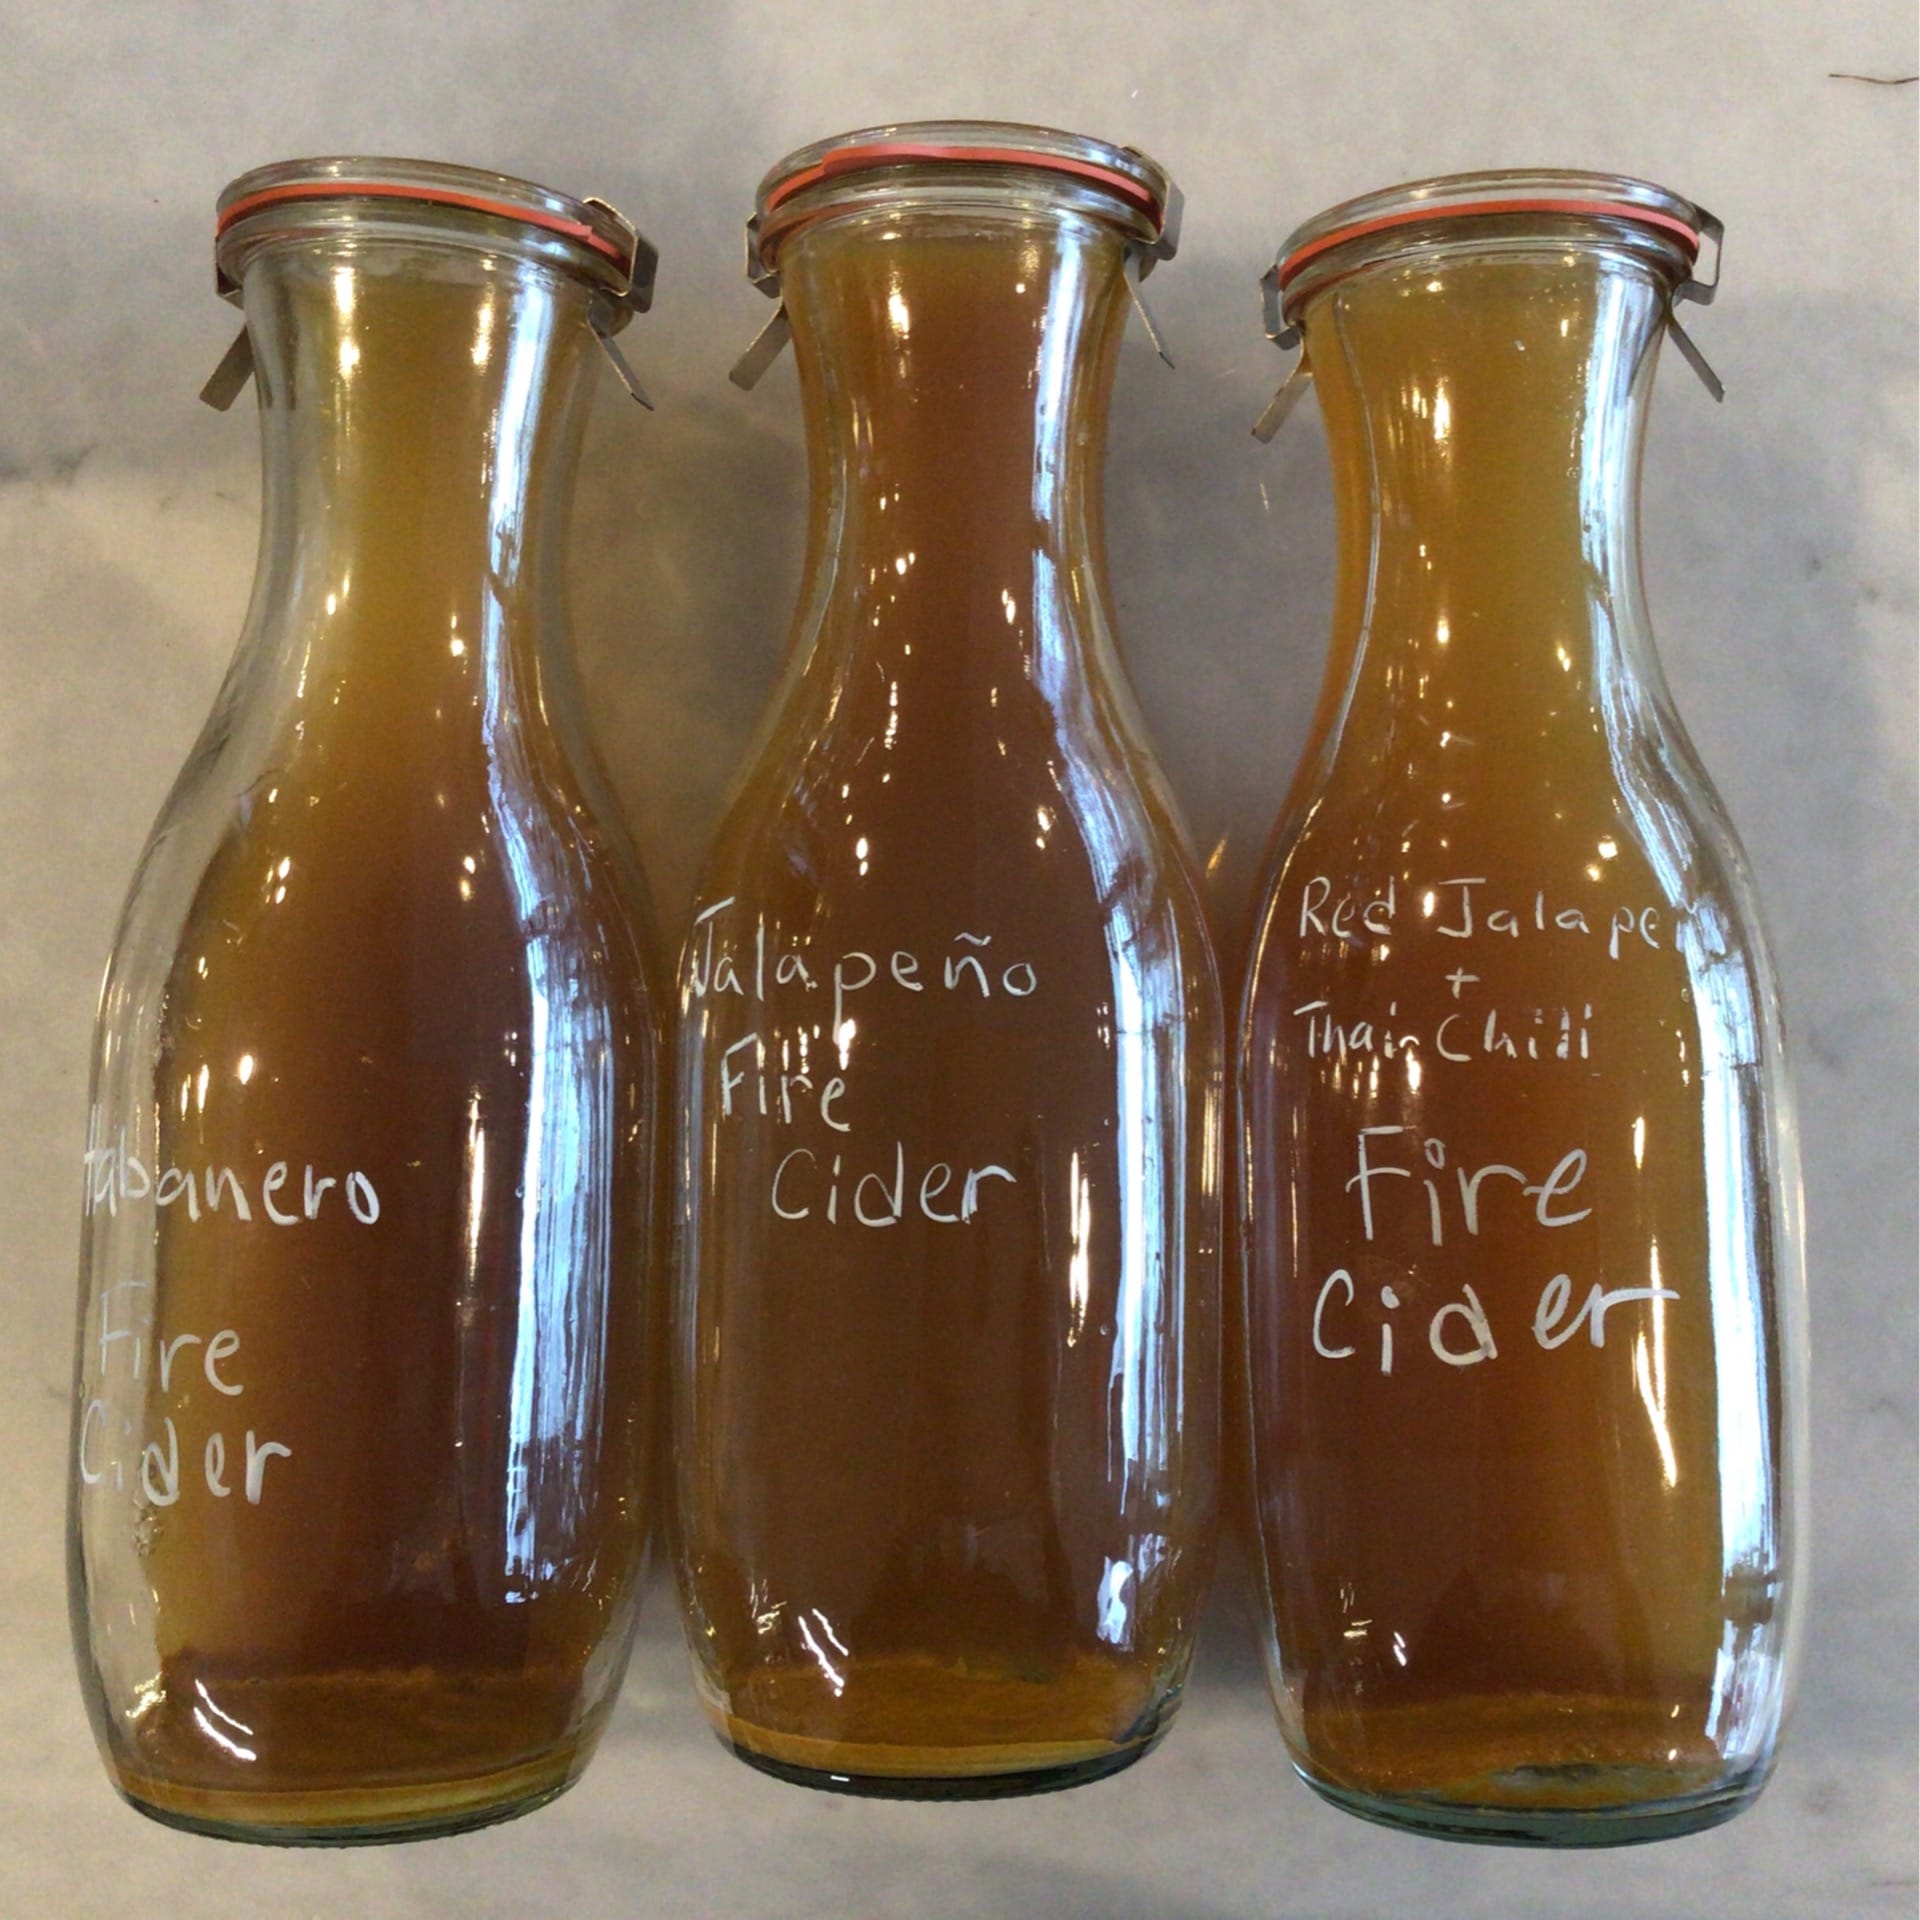 sold out fire cider tonic 15 oz